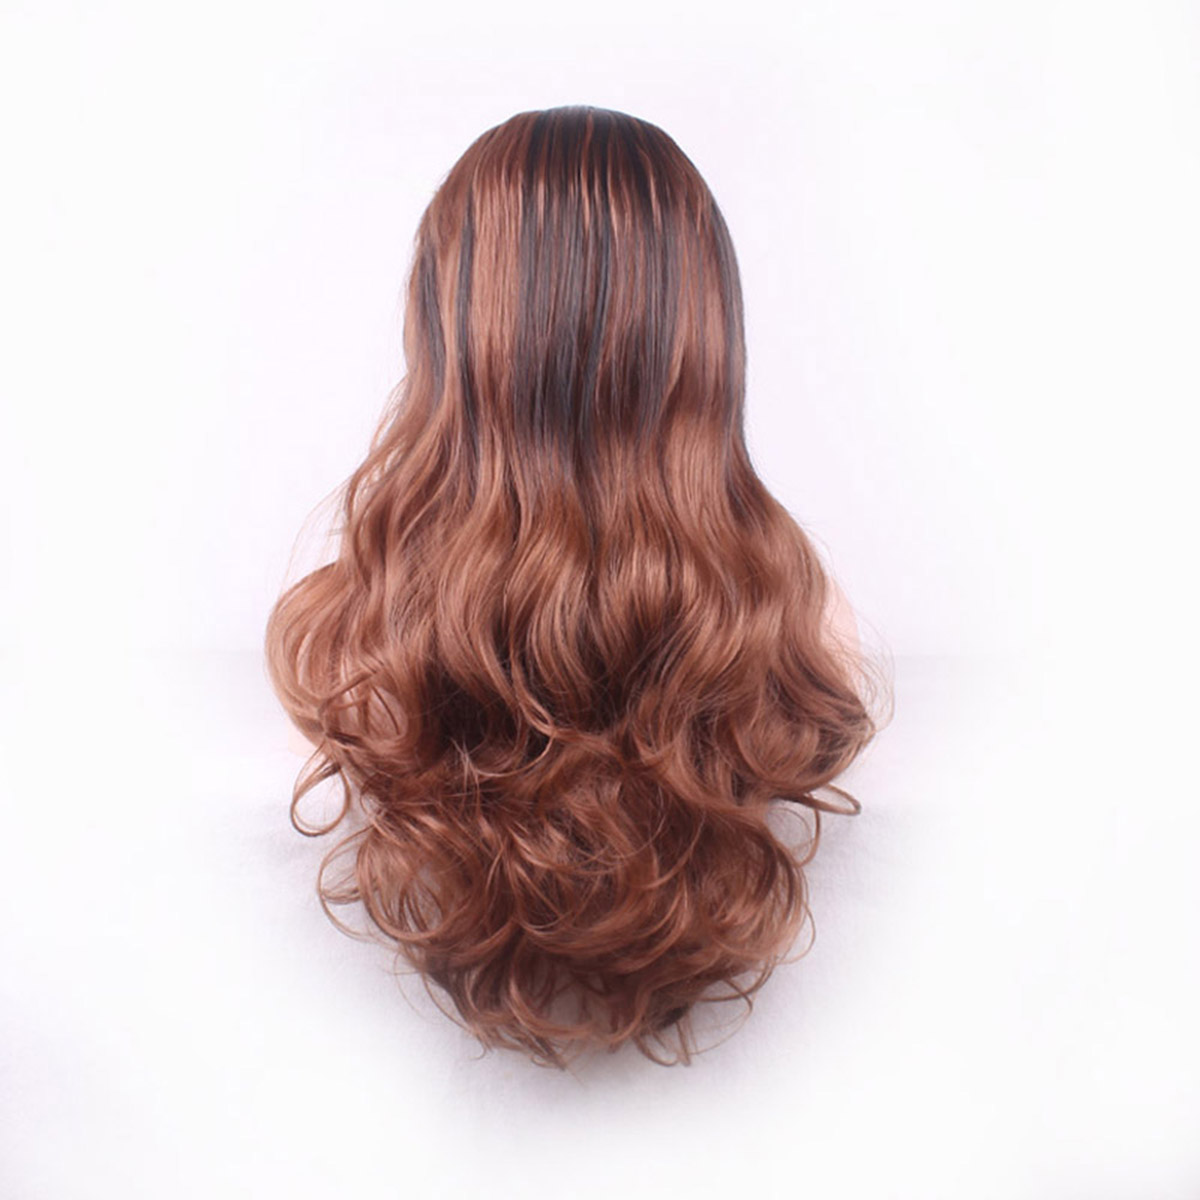 Stylish Daliy Use Wig Long Curly Wavy Brown Hair Synthetic Ombre Wigs